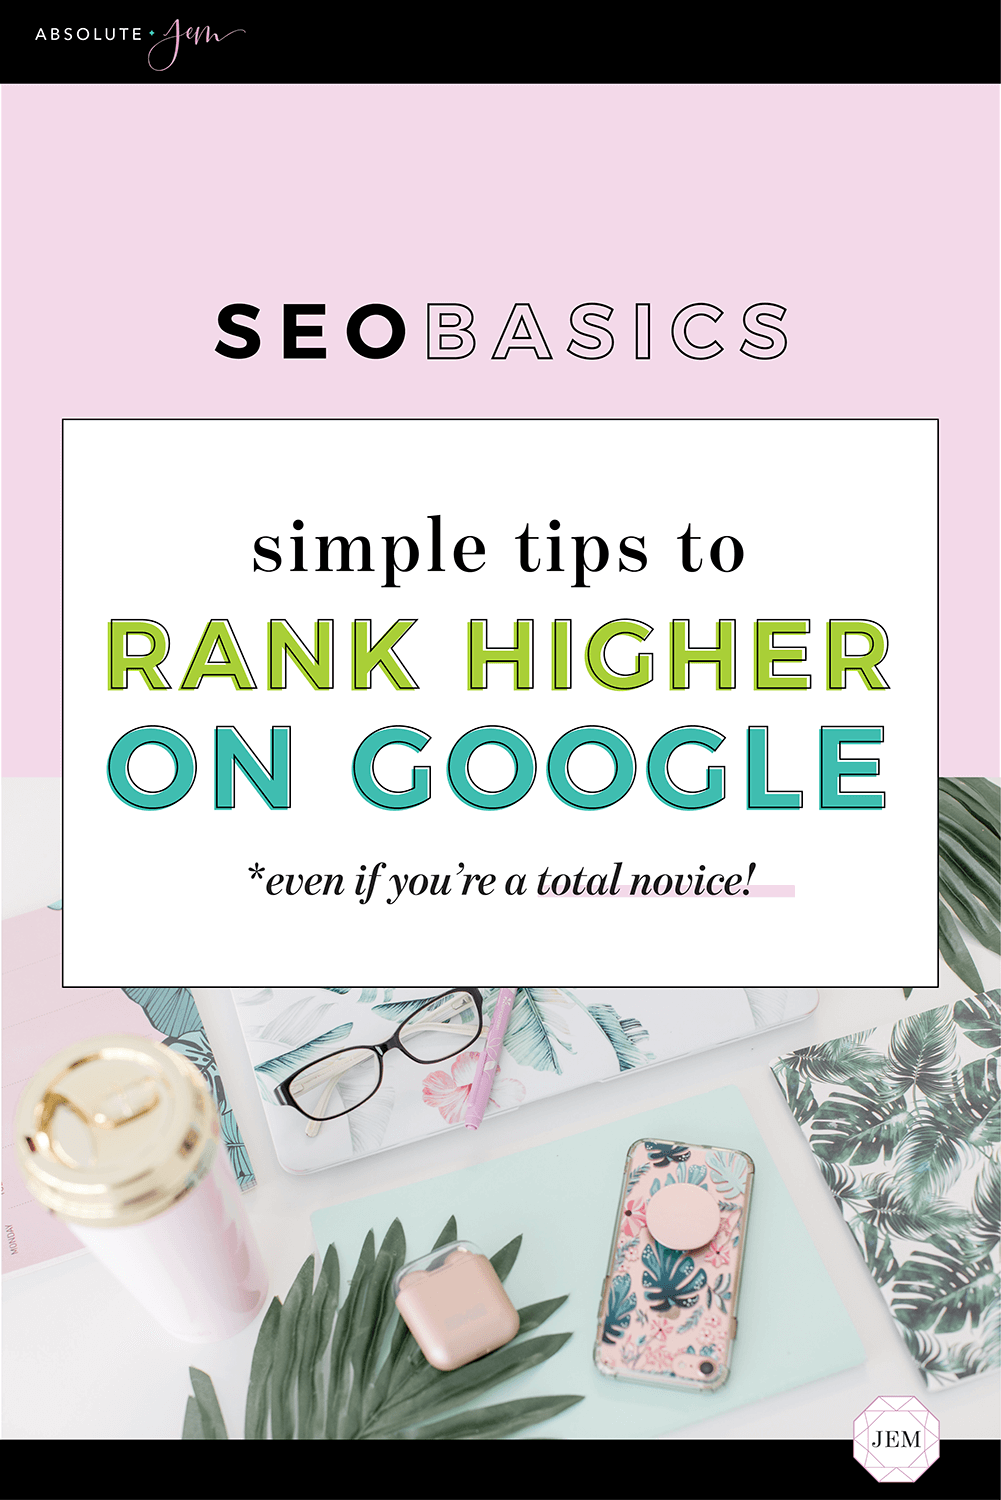 Simple SEO Tips To Rank Higher on Google | Absolute JEM Blog